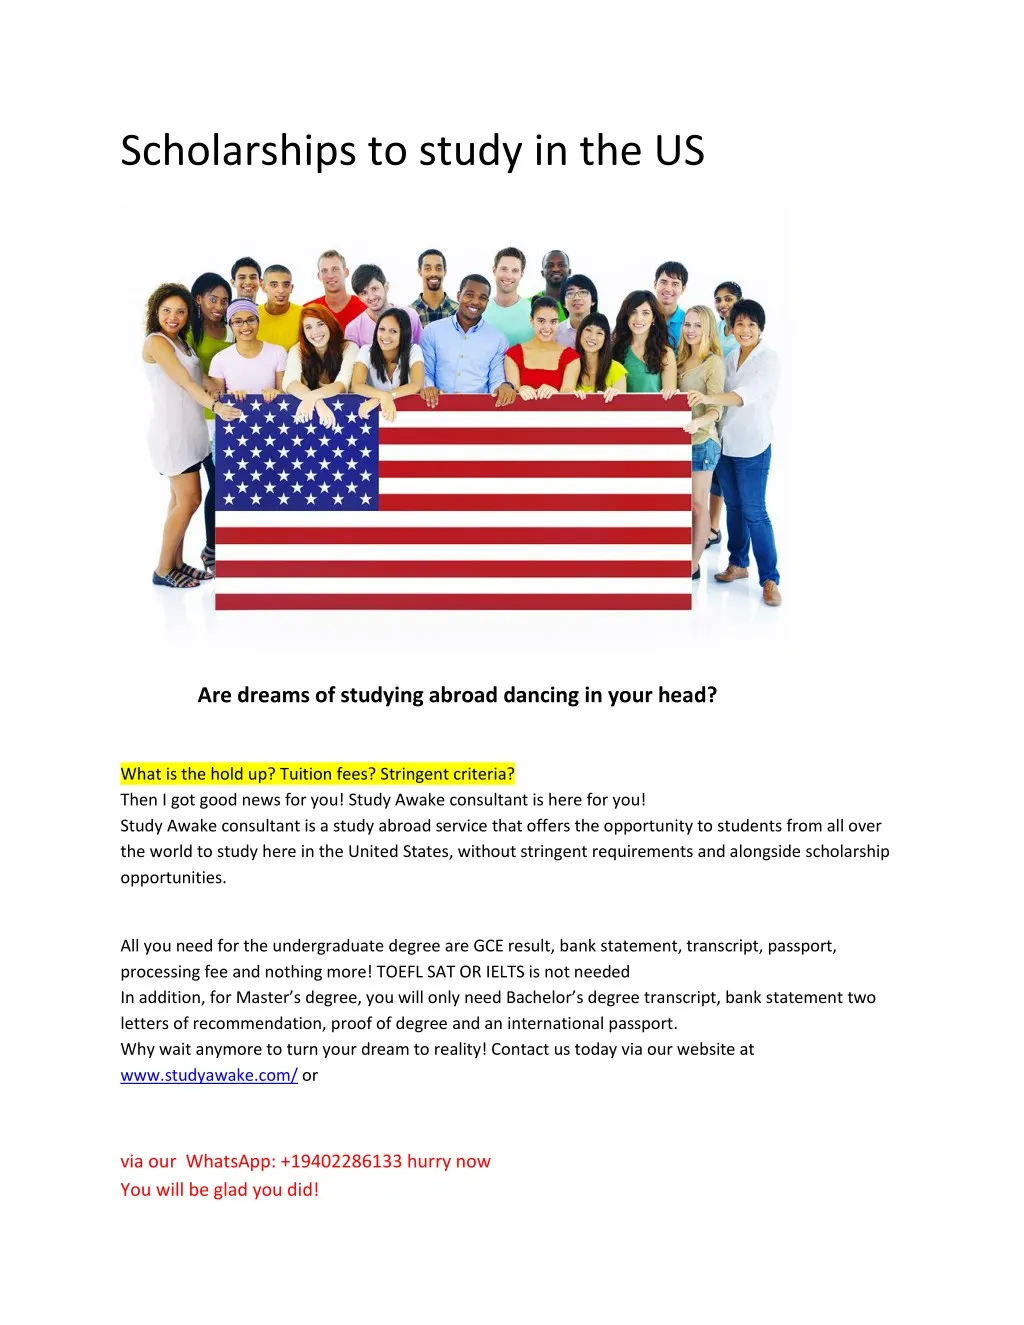 scholarships to study in the us